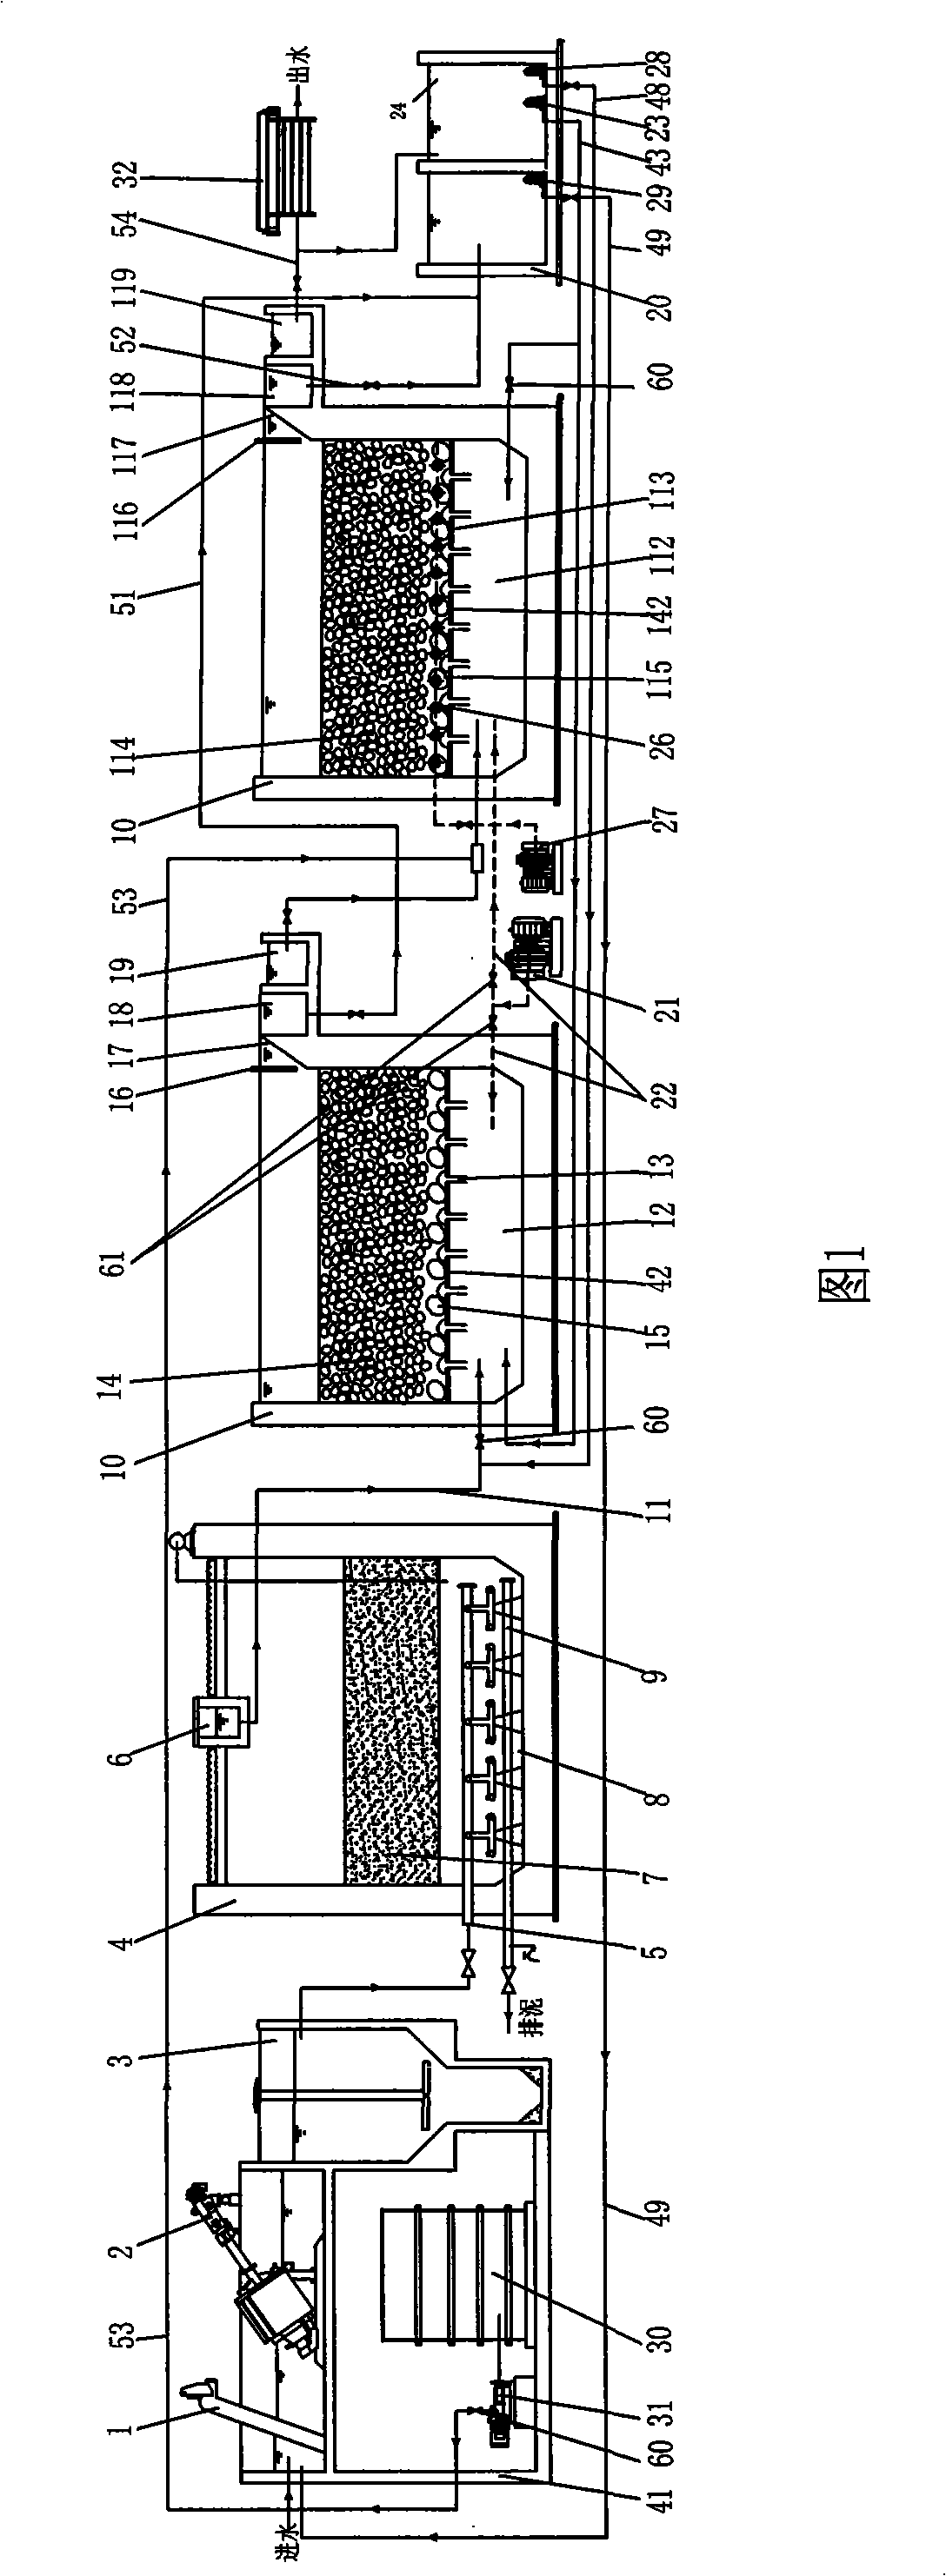 Method for employing anaerobic-aerobic combined biological filter to process domestic sewage